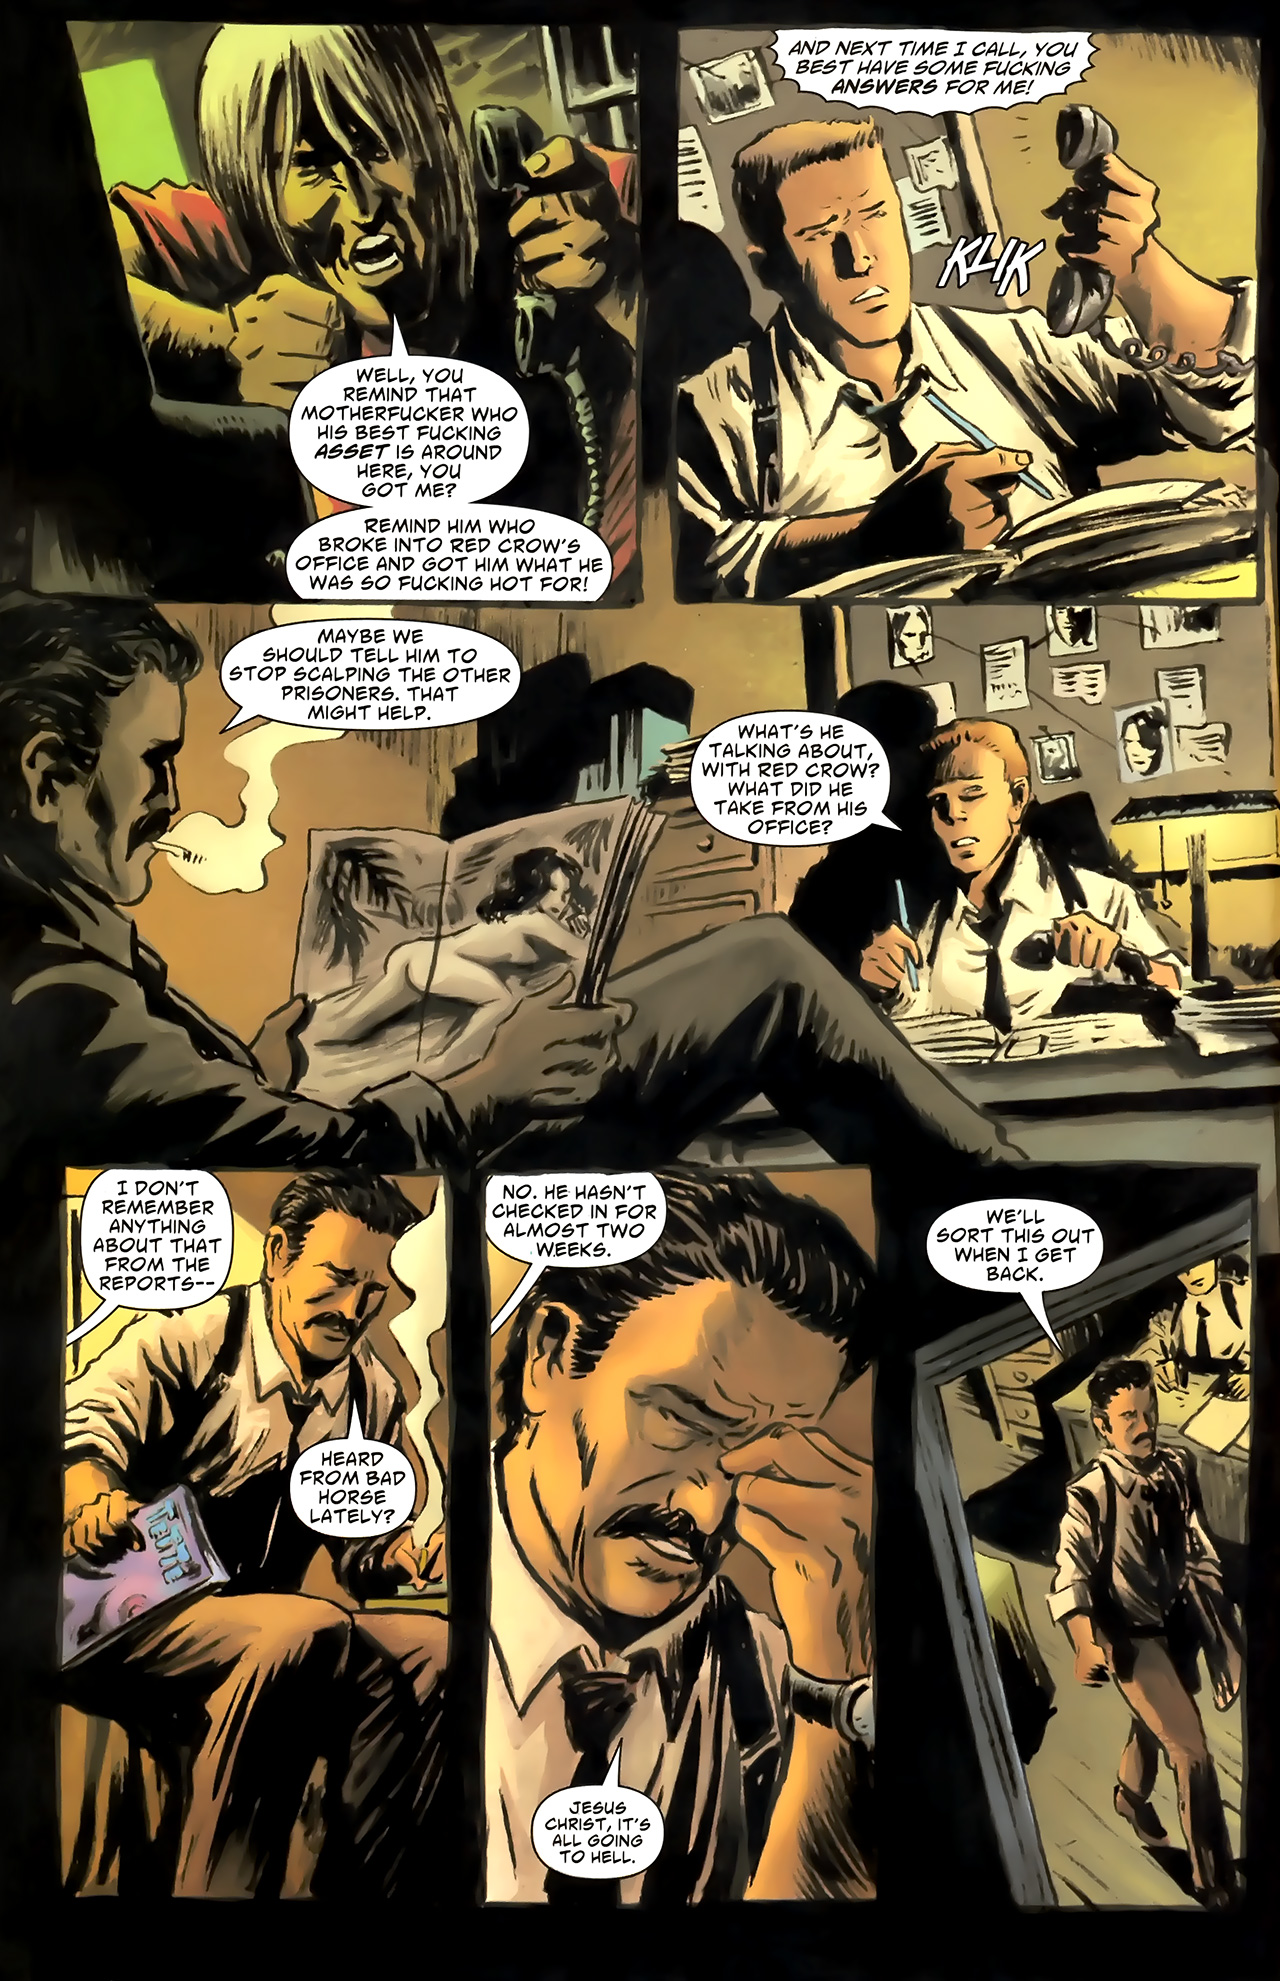 Scalped #27 - The Ballad of Baylis Earl Nitz: High Lonesome, Part Three of Five